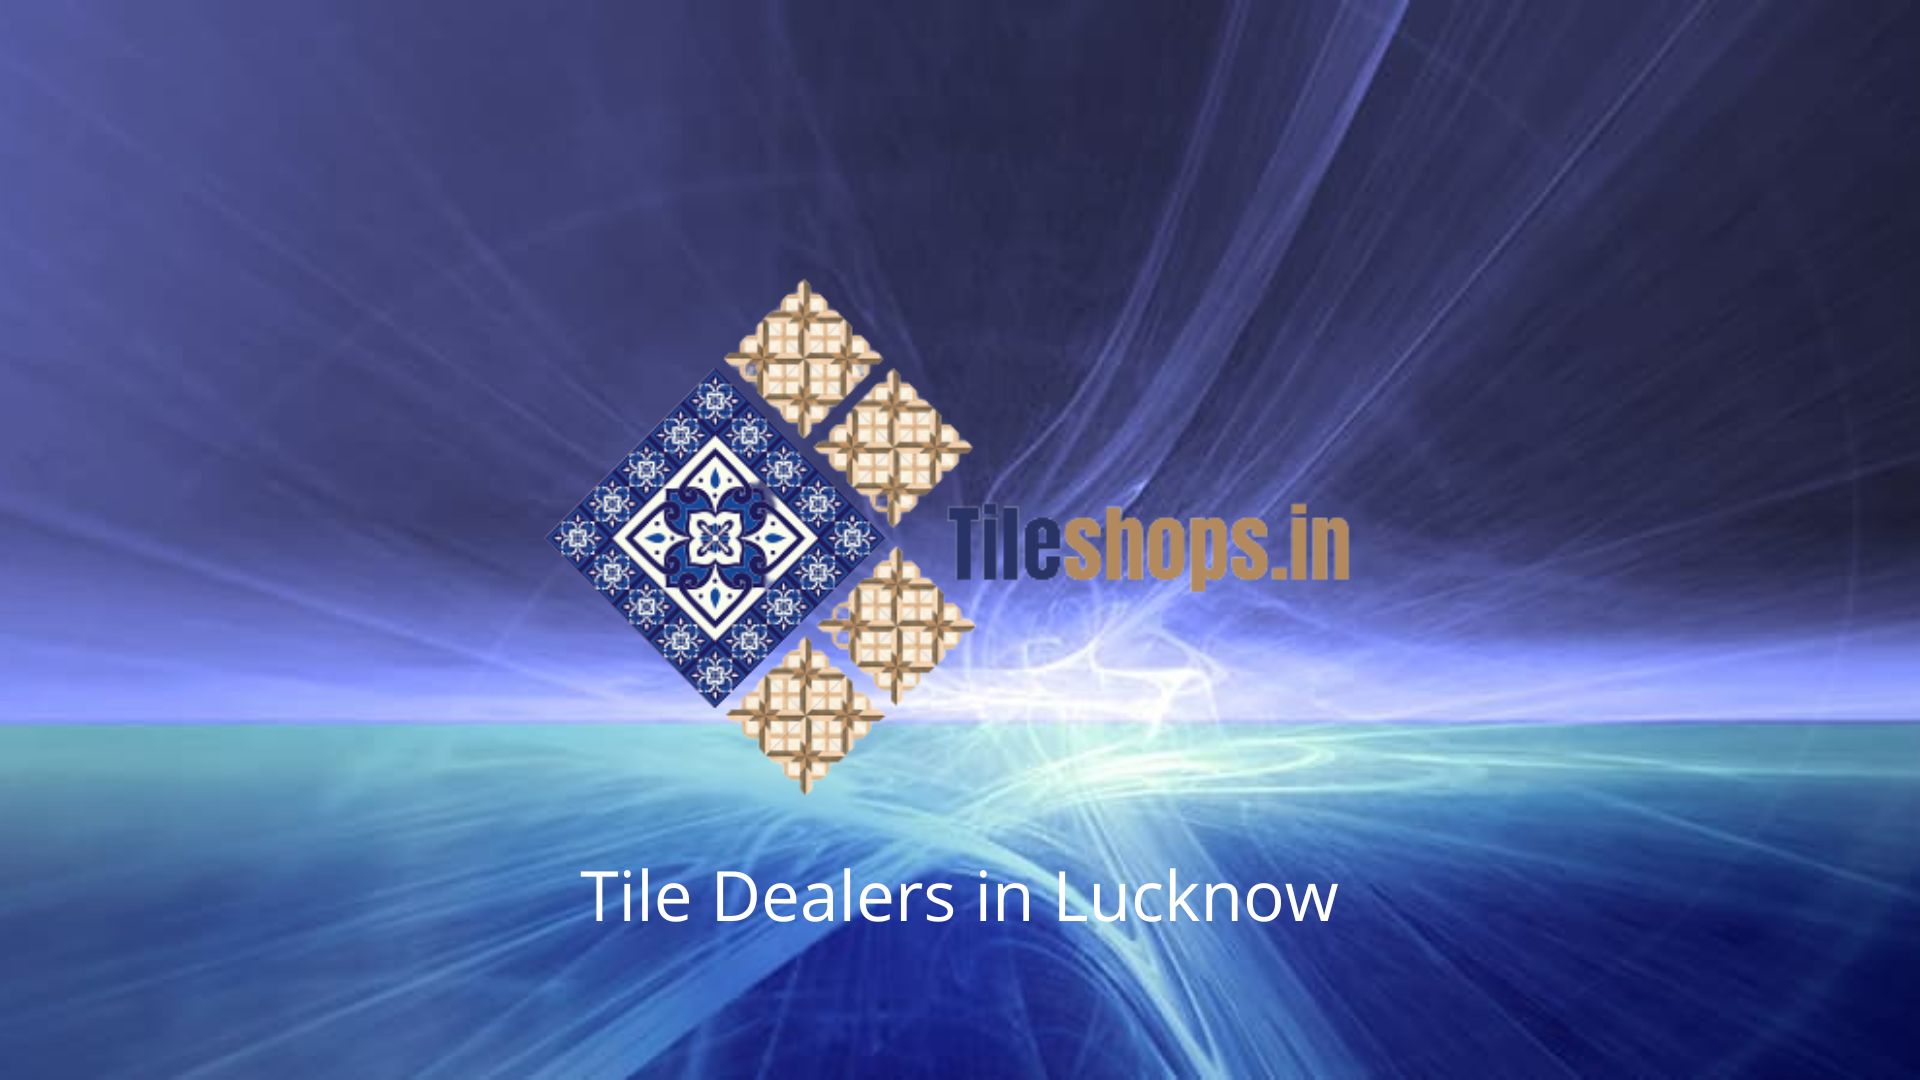 Tile Dealers in Lucknow